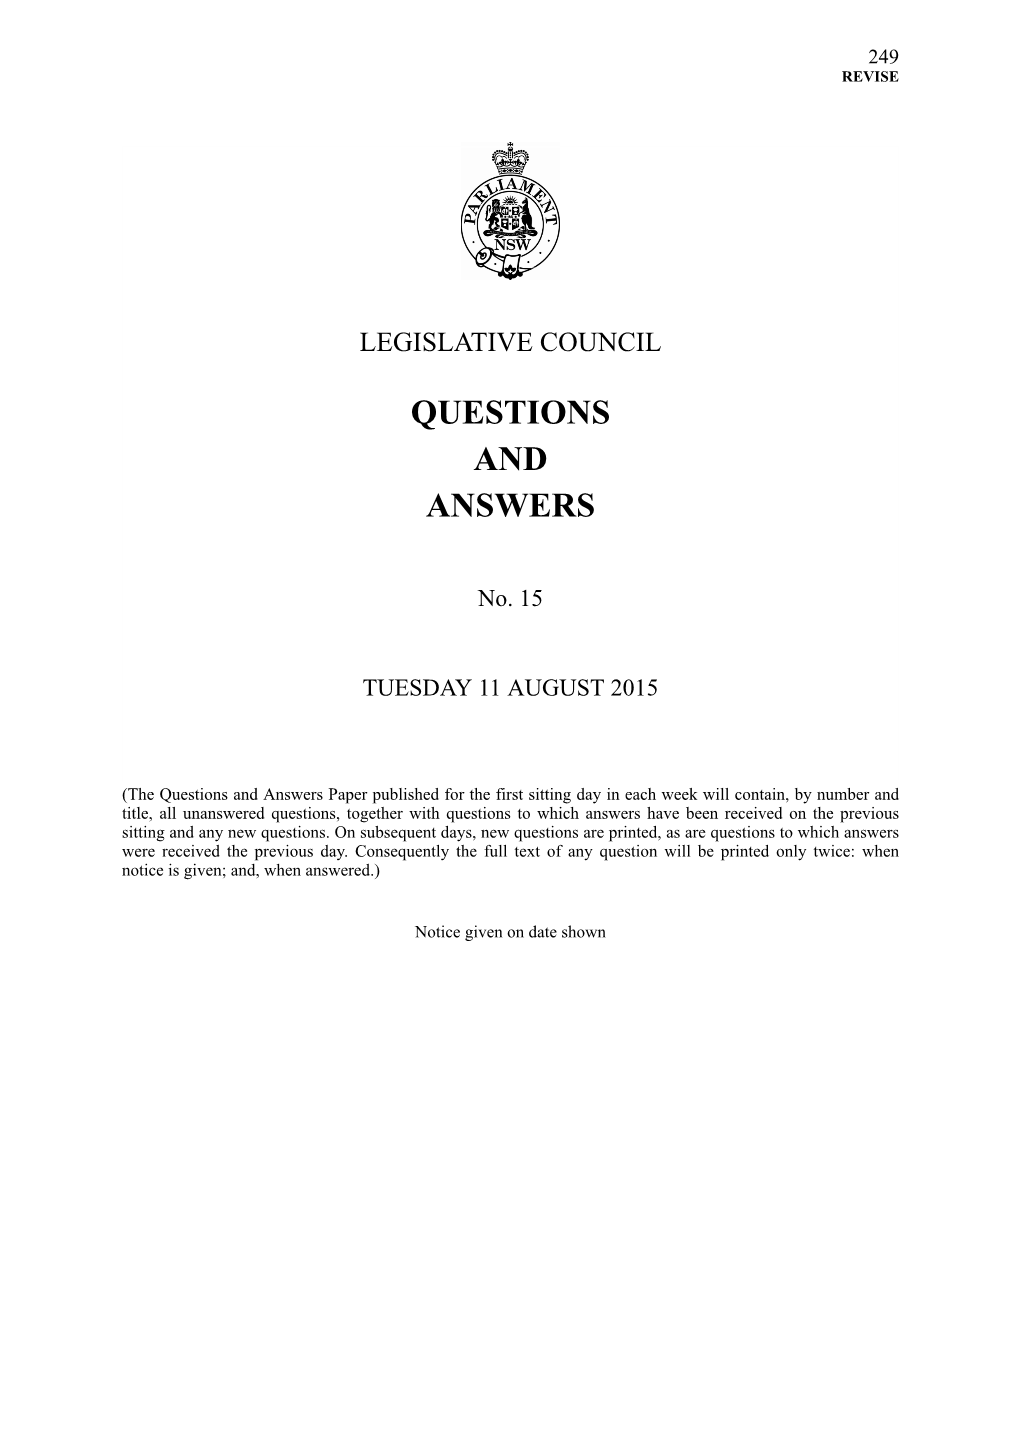 Questions & Answers Paper No. 15